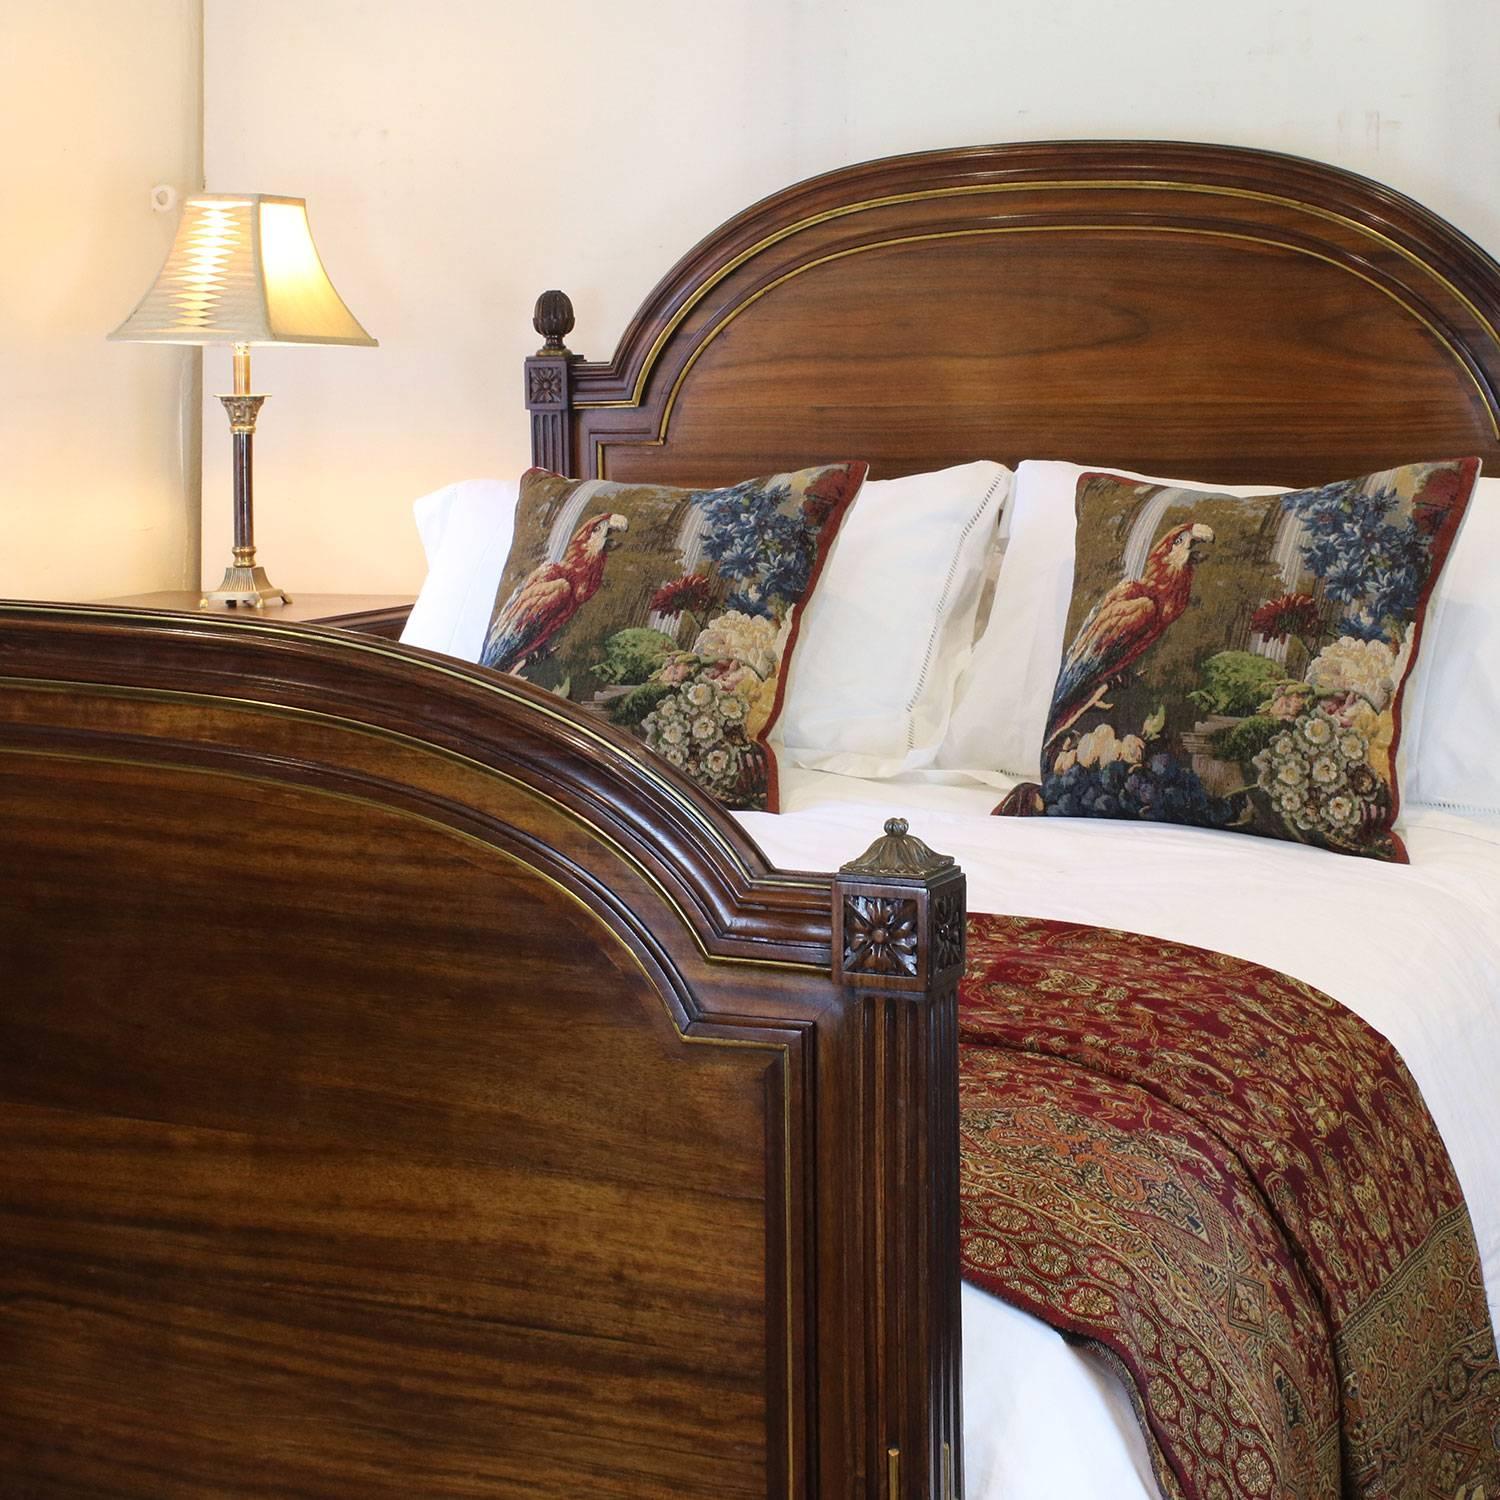 A mahogany bed with fine deep patina, acorn finials and brass string work.

This bed accepts a British king-size or American queen-size (60 in wide) base and mattress set.

The price is for the bedstead alone. The base, mattress and linen are